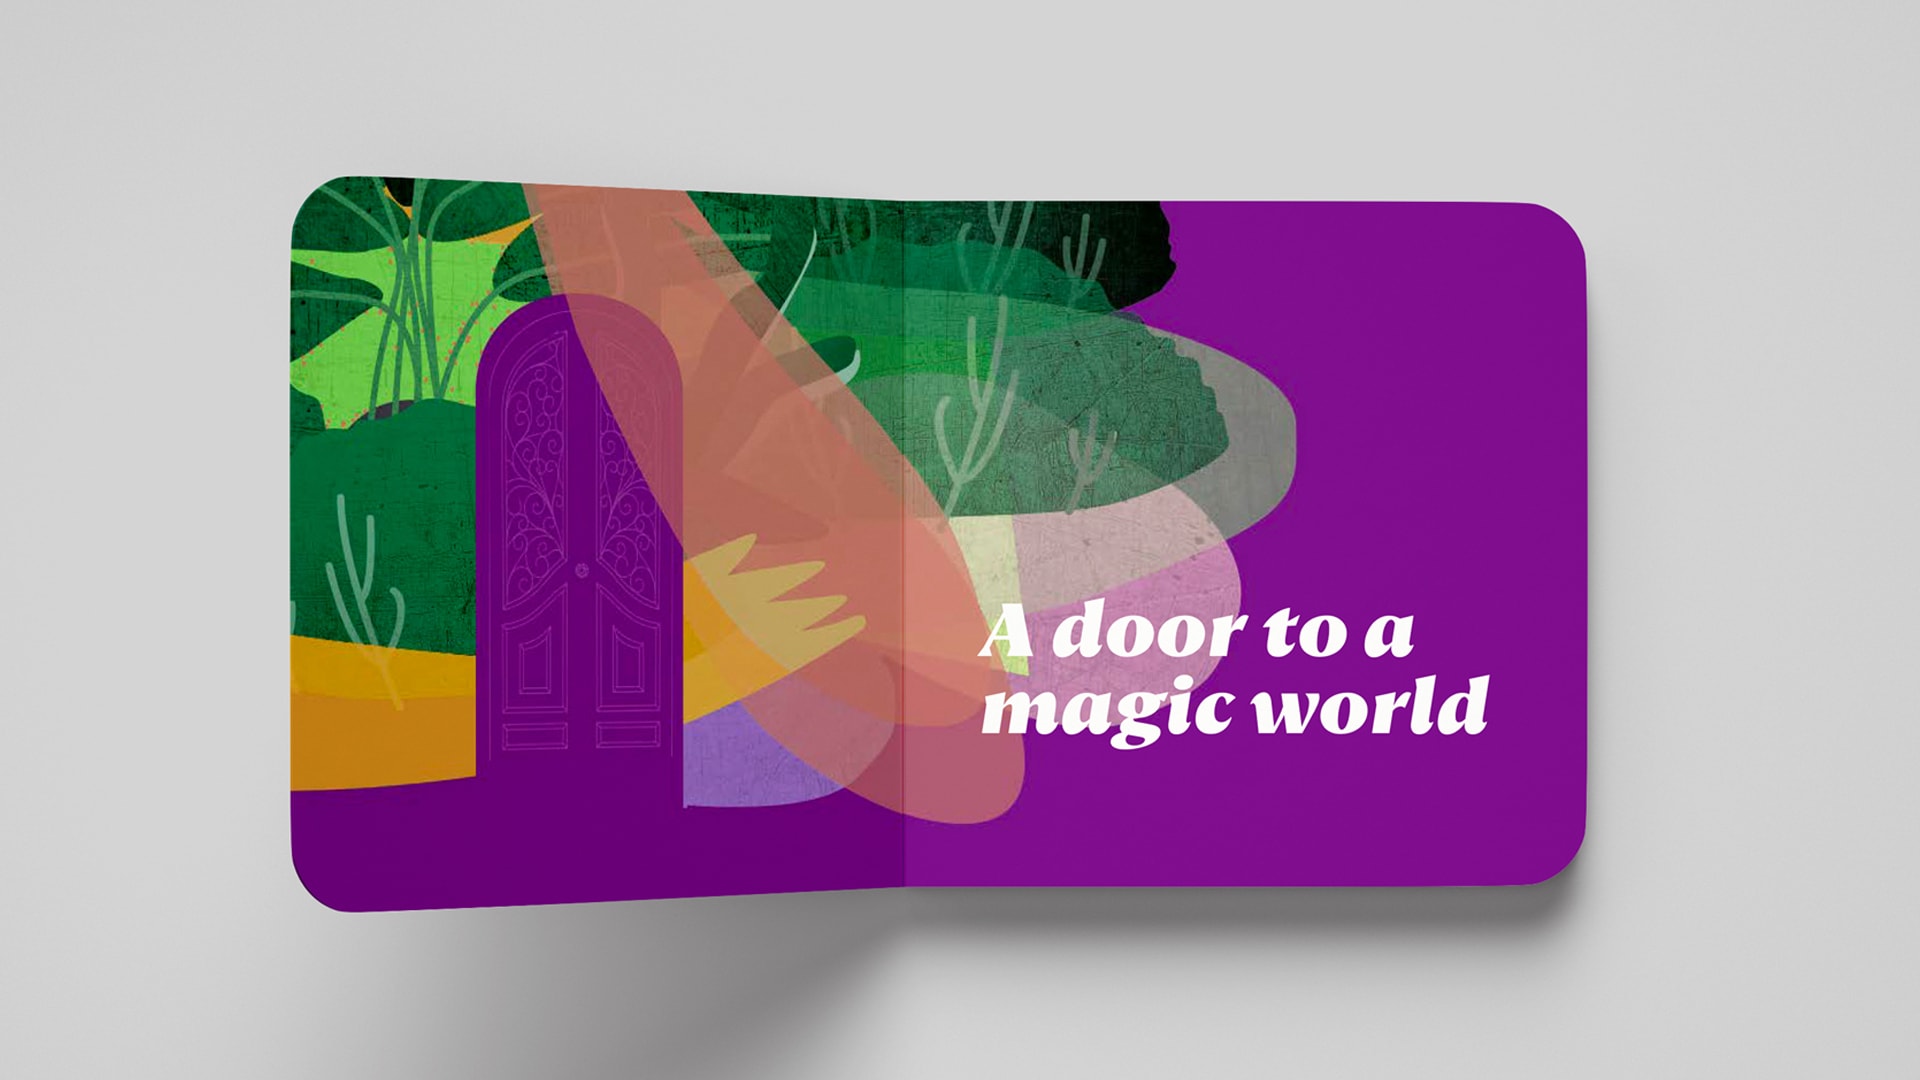 An image of an inside book cover design displaying the Faerie branding consisting of close up of an element of the wider design, making it look like an abstract pattern. The words 'A door to a magic world' are displayed